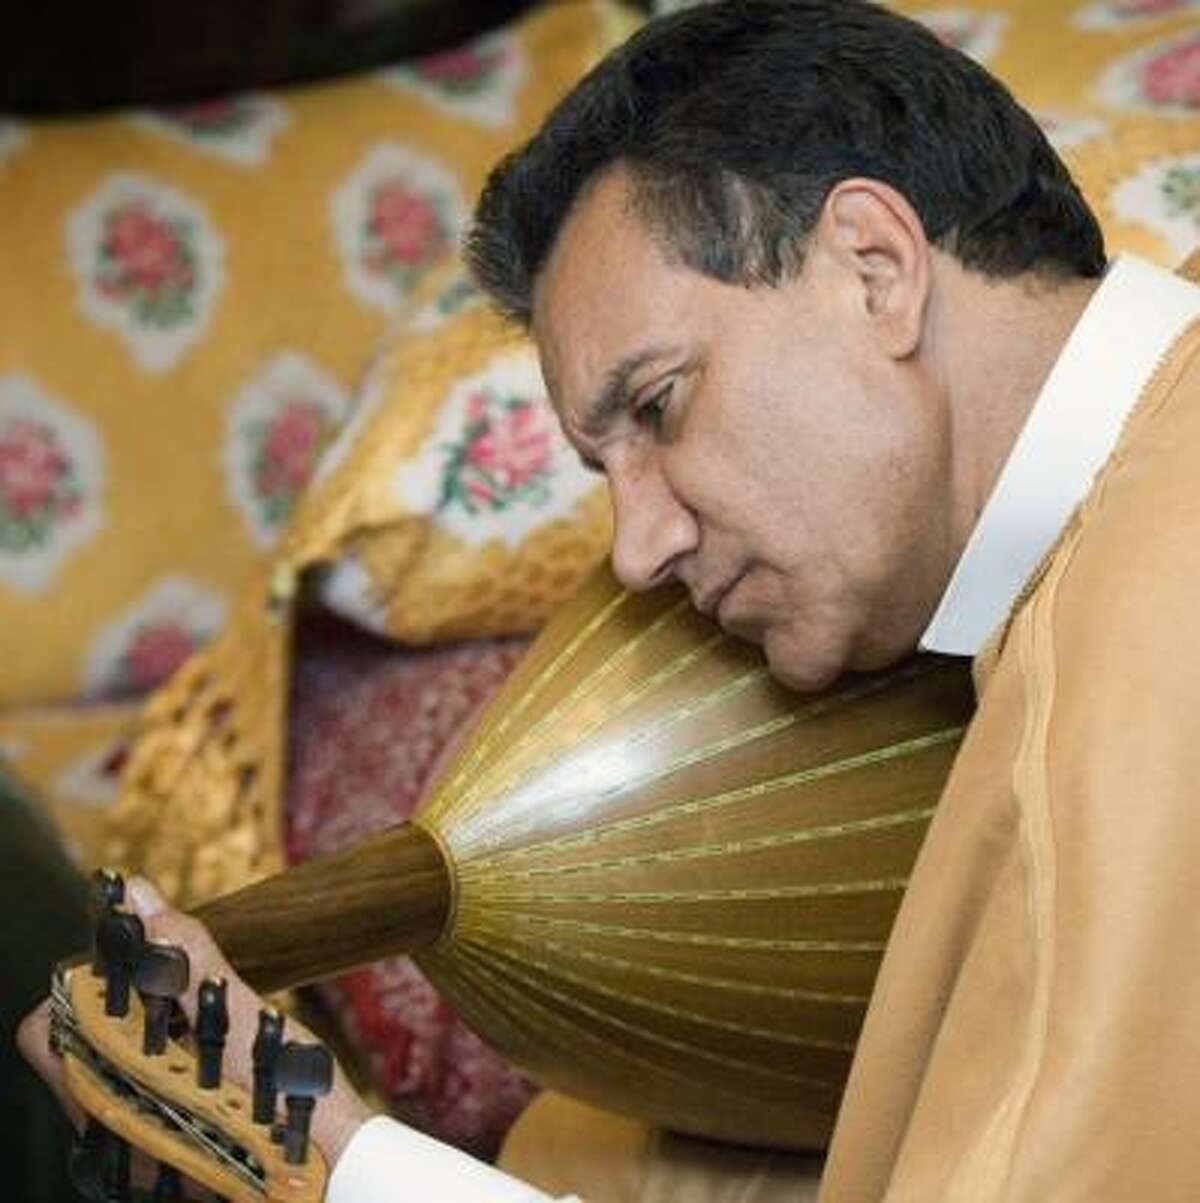 Haj Youness will perform with a group of world musicians who up to now have collaborated only via the Web.